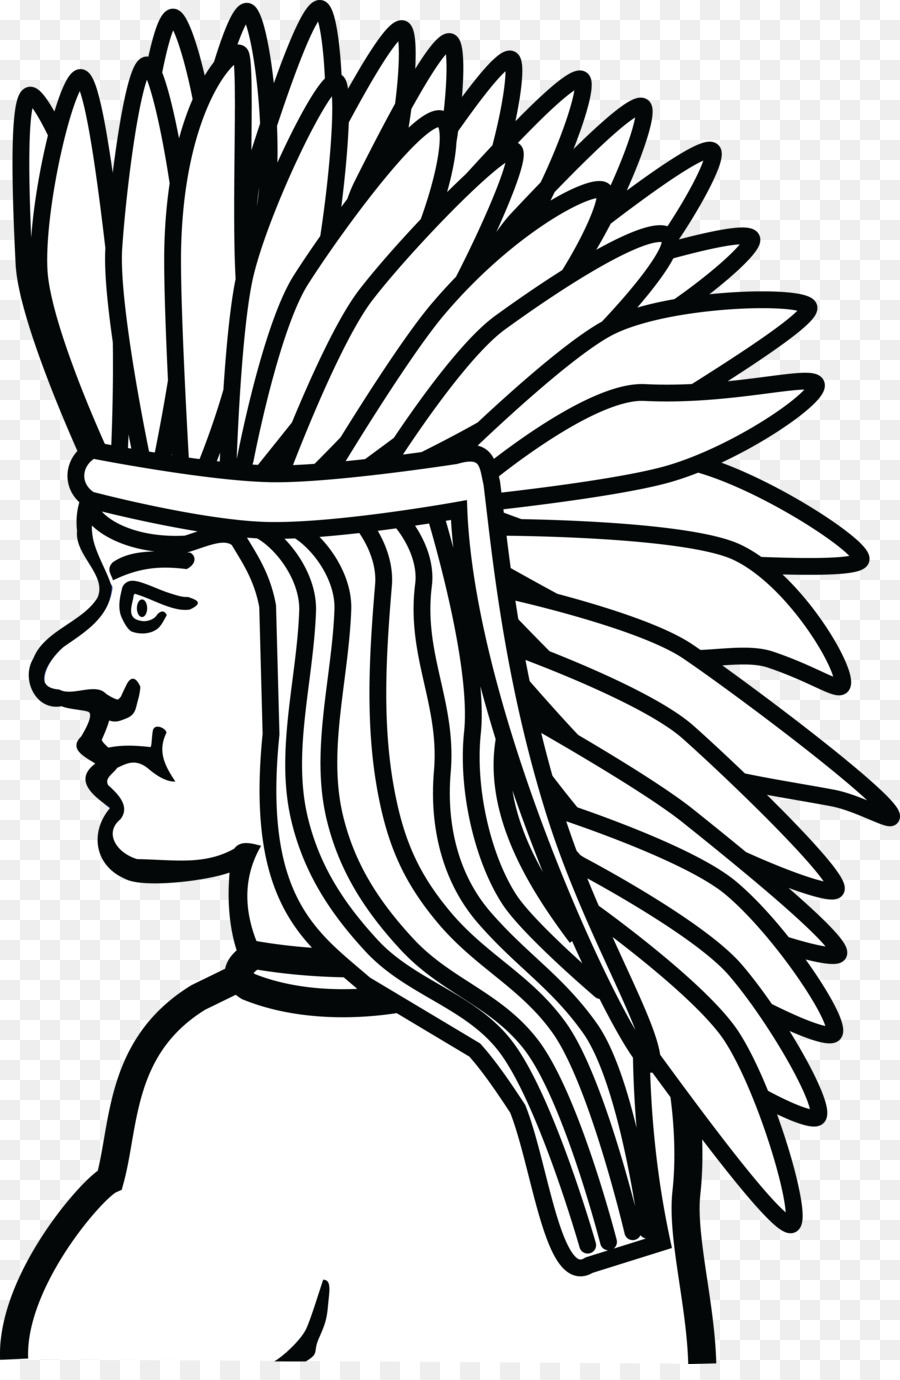 Native Americans in the United States Indigenous peoples of the Americas Line art Clip art - native american png download - 4000*6060 - Free Transparent Native Americans In The United States png Download.